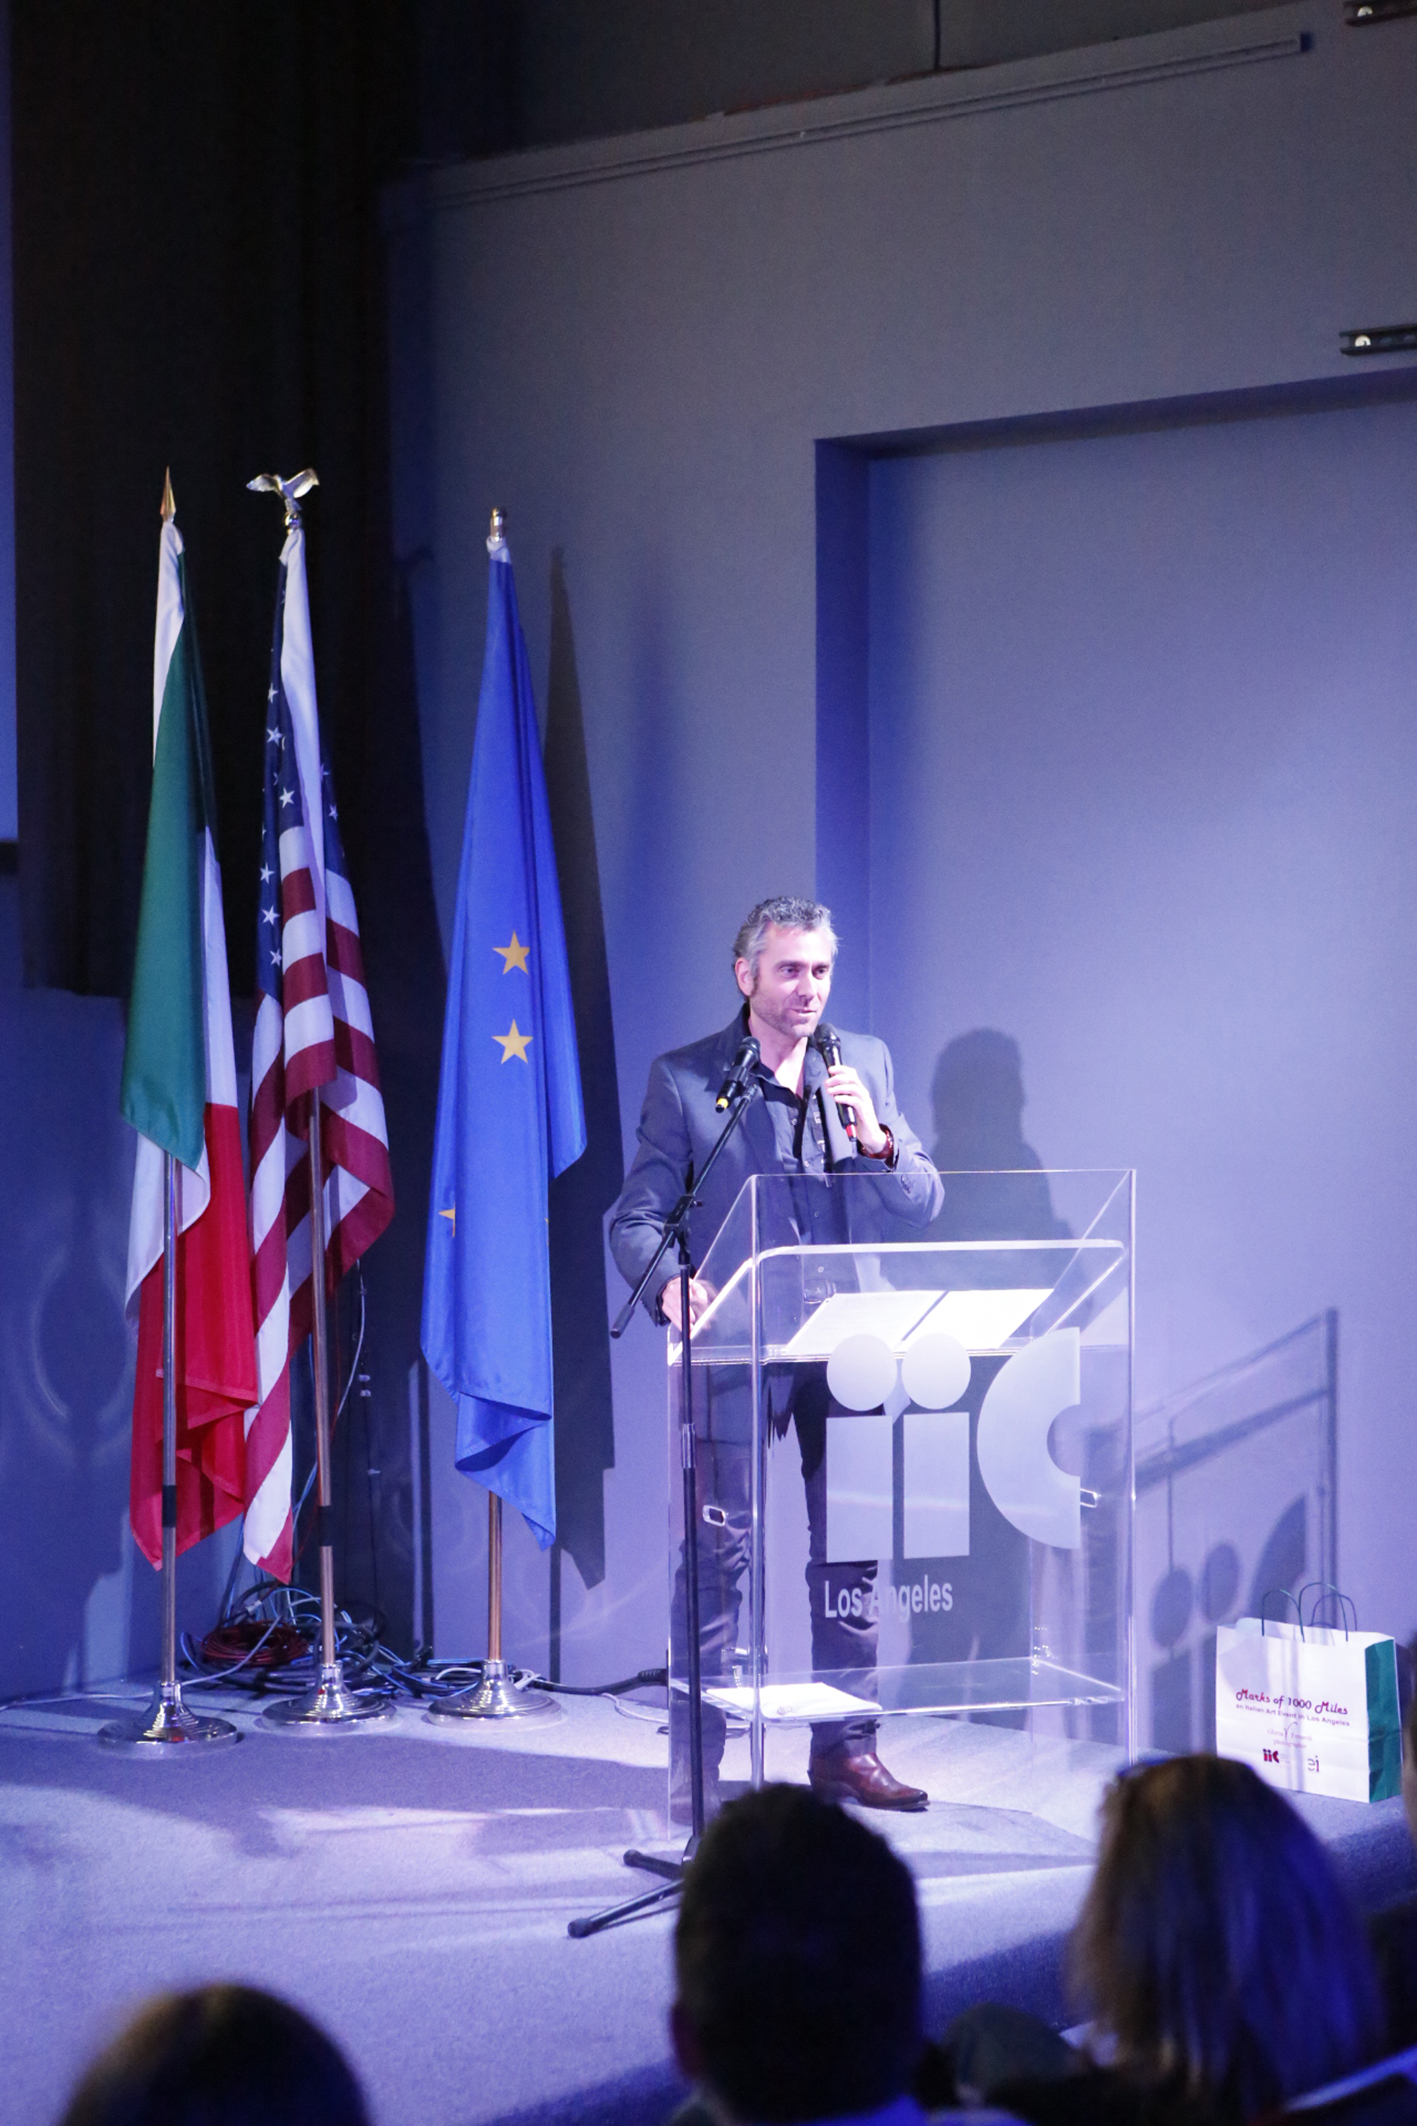 Max Leonida, during his speech at the Italian Cultural Institute of L.A.